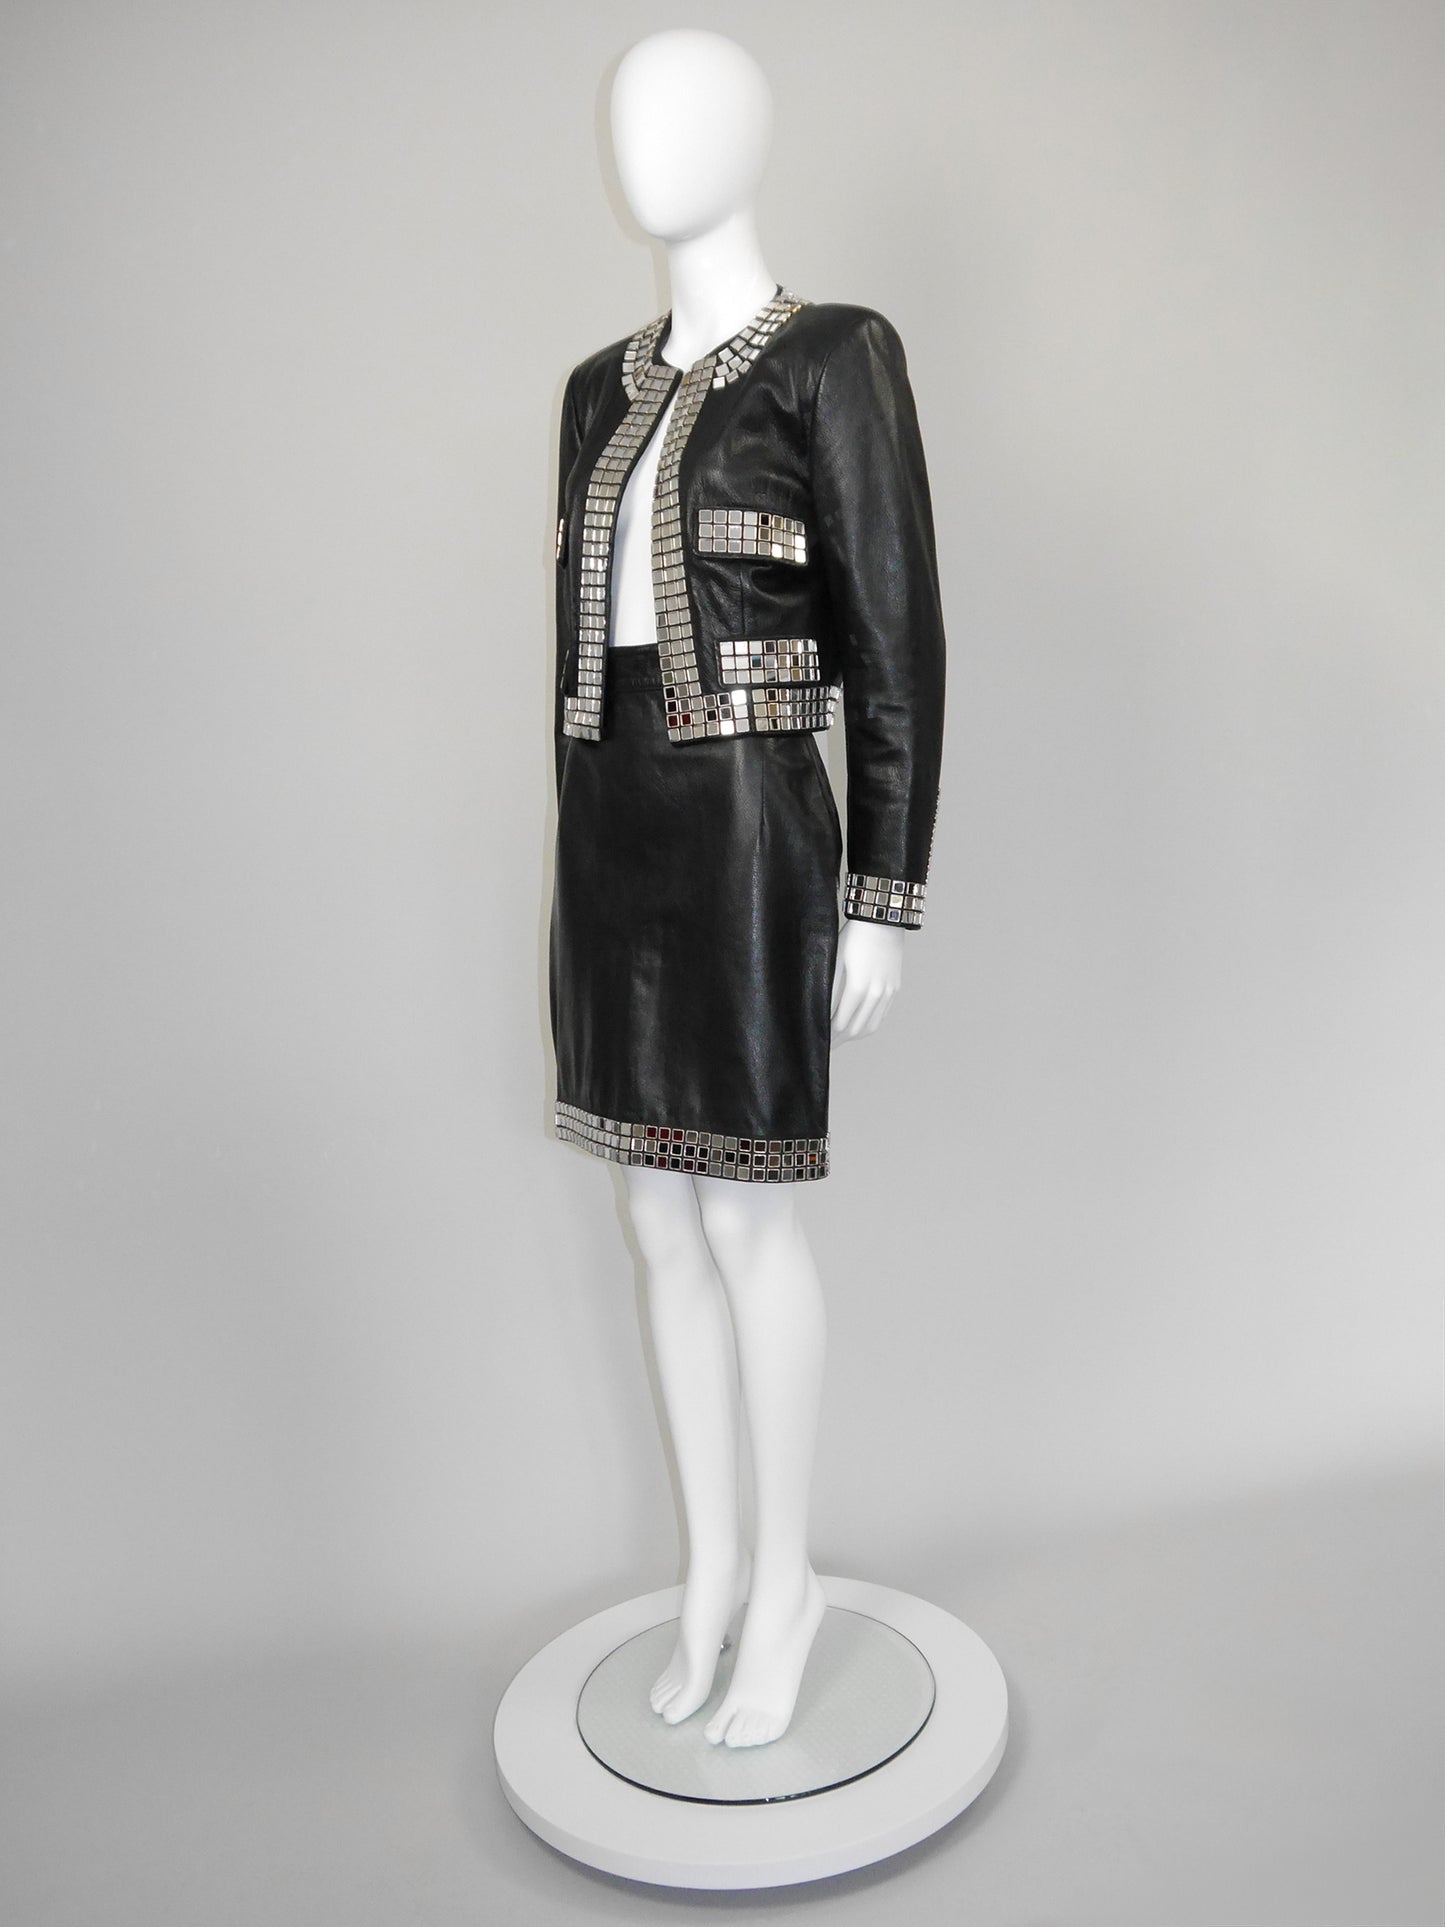 MOSCHINO 1980s 1990s Vintage Mirrored Black Leather Jacket & Skirt Suit Size S